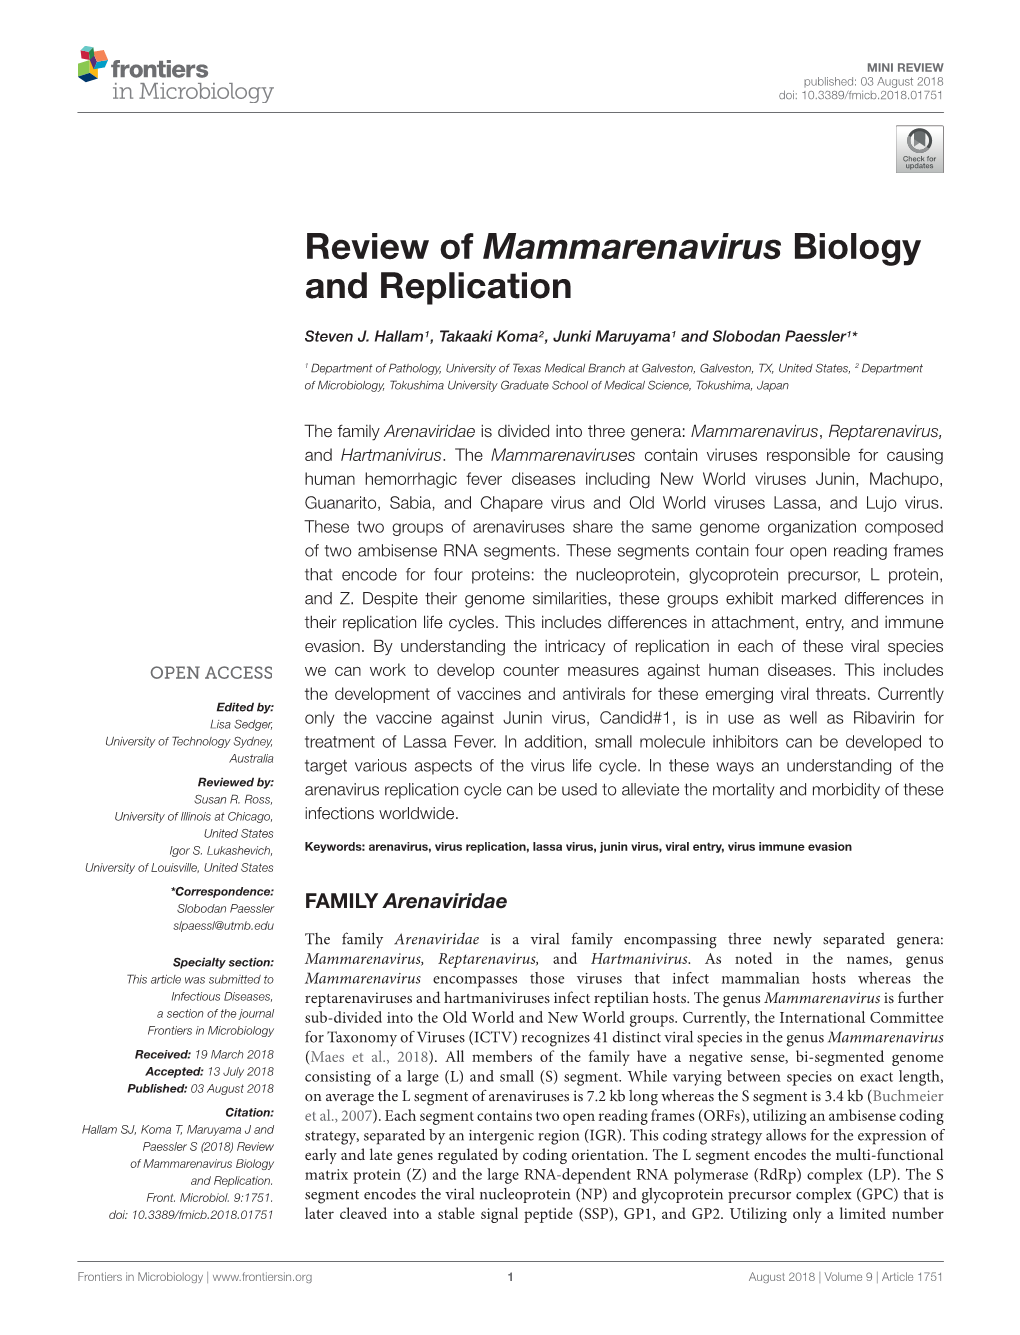 Review of Mammarenavirus Biology and Replication